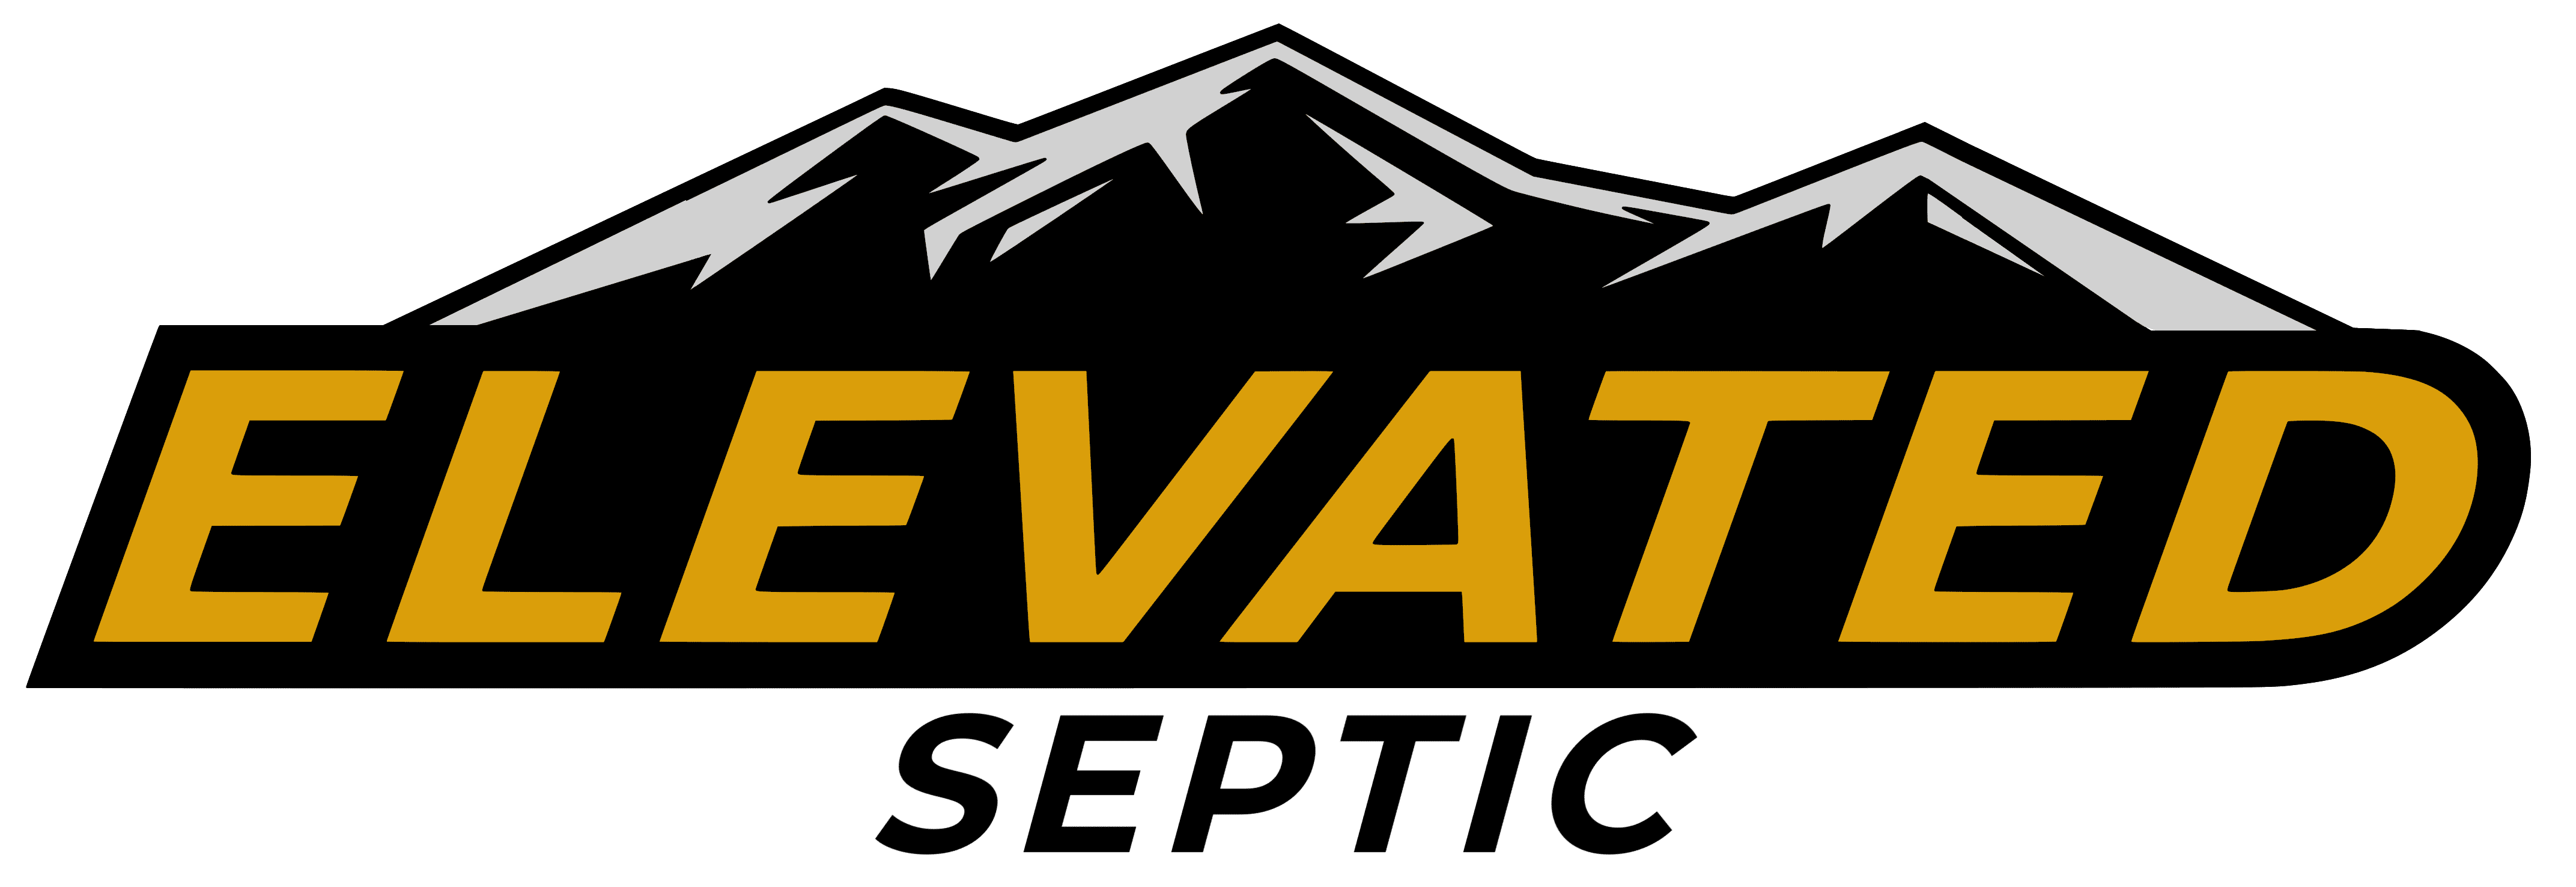 Elevated Septic Tank Installations